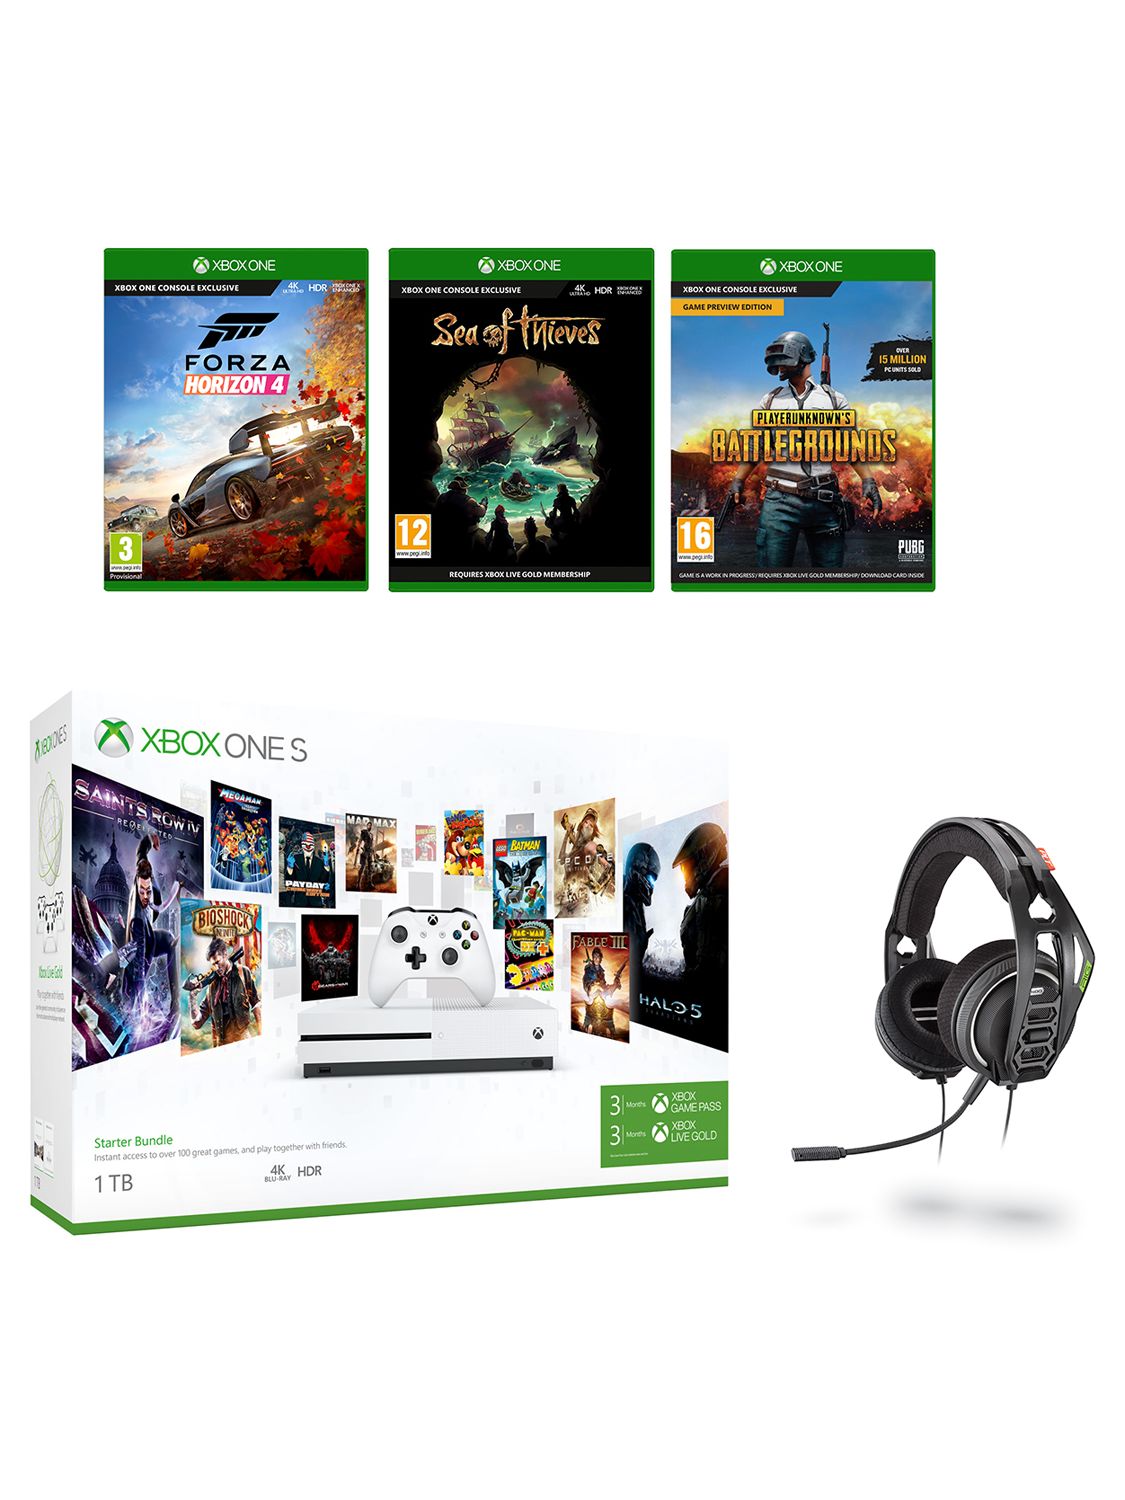 Microsoft Xbox One S Console, 1TB, with Wireless Controller and PlayerUnknown’s Battlegrounds, Forza Horizon 4, Sea of Thieves and Turtle Beach Ear Force Stealth 700 Gaming Headset Bundle